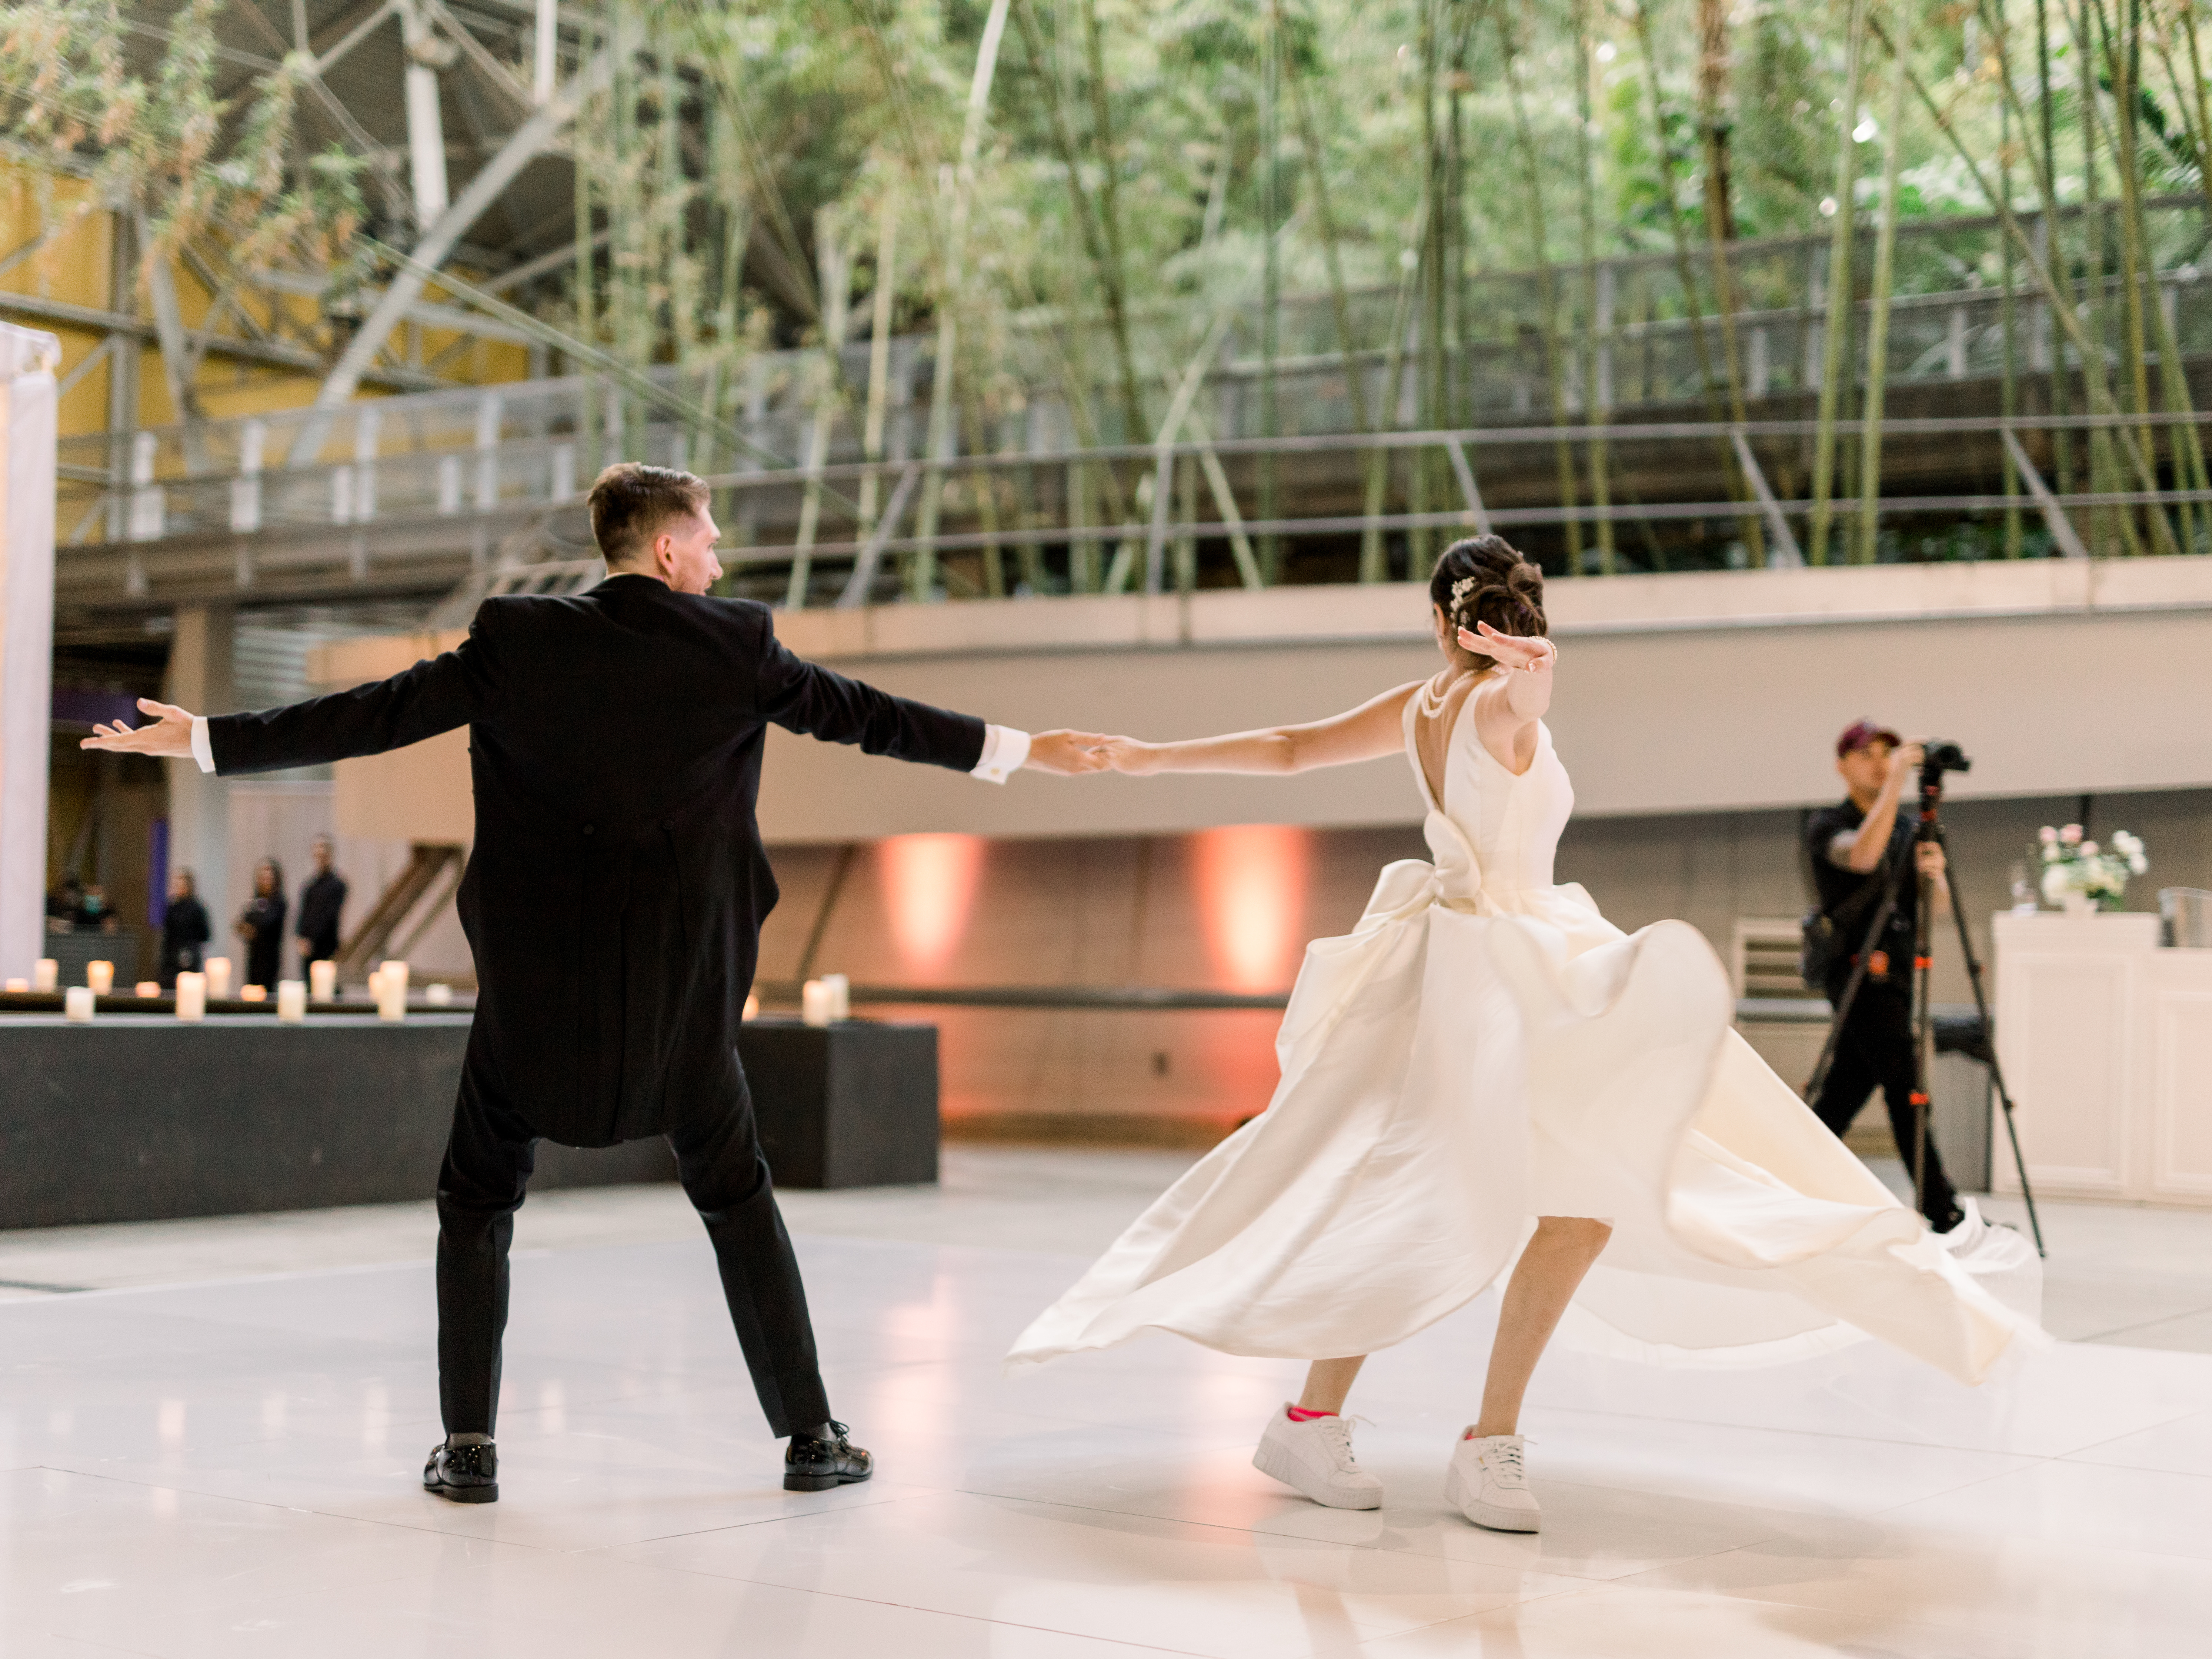 A bride and groom dance on a white dance floor on the east side of the Wallis Annenberg Building: Big Lab. In the background there is a photographer, event lighting, and a bamboo forest.